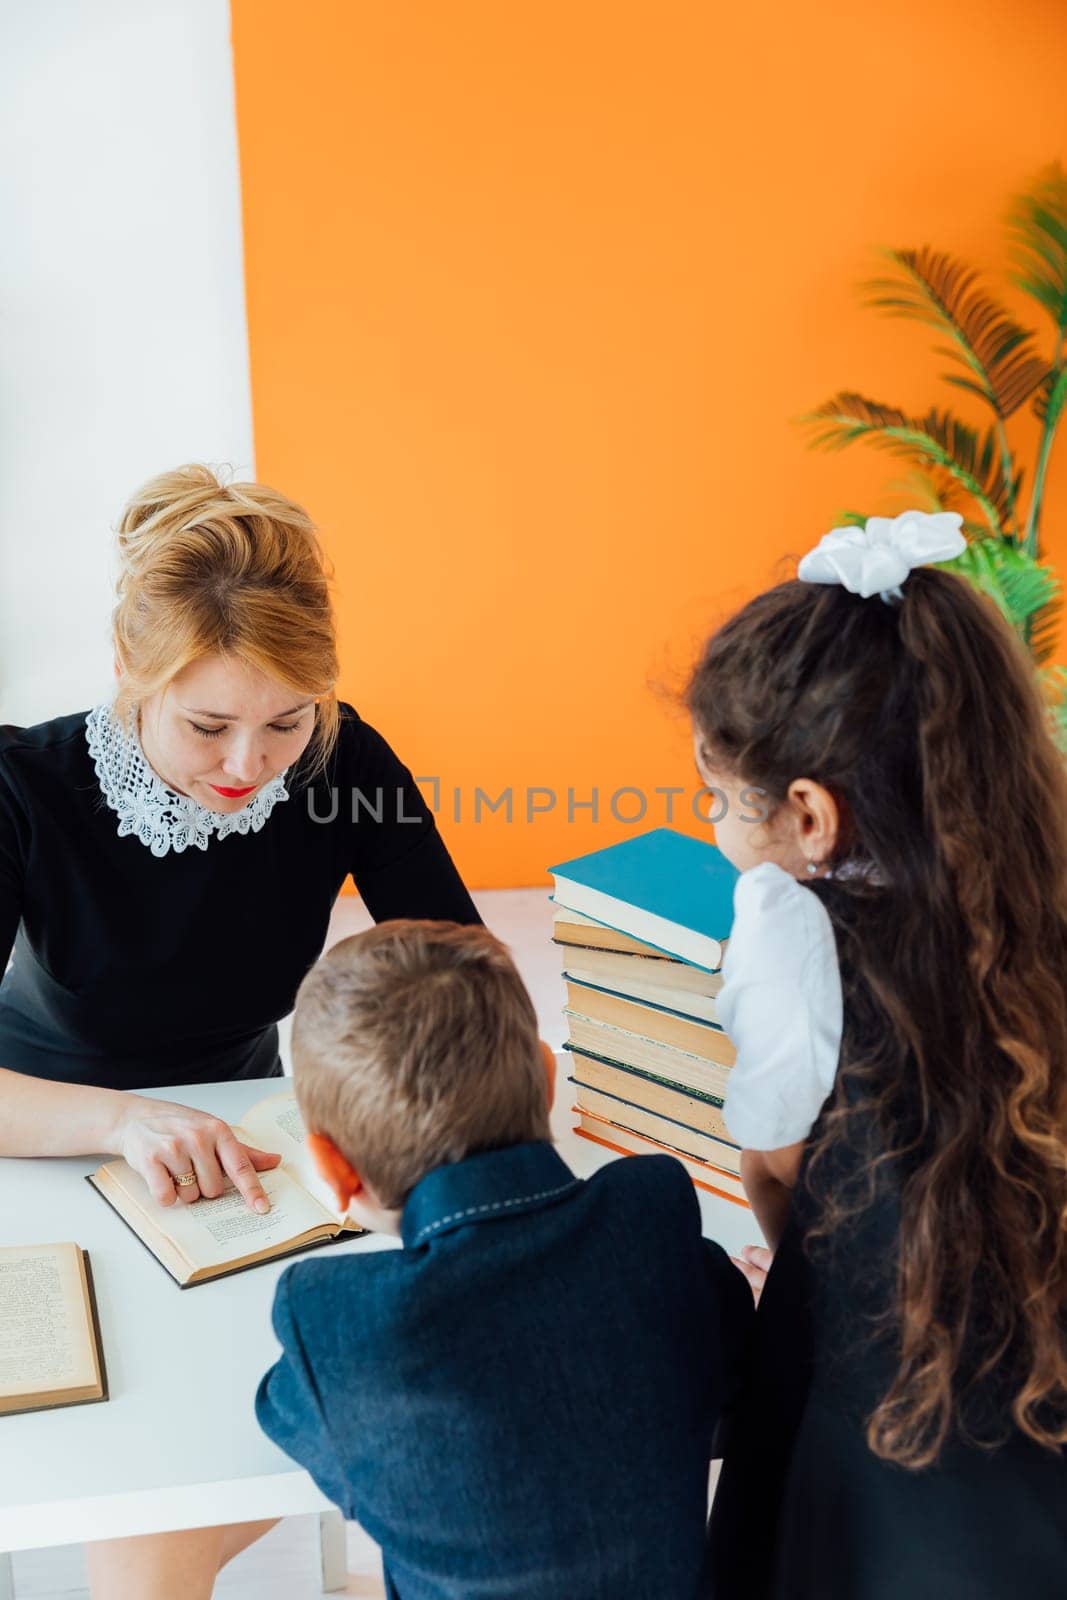 Teacher at literature lesson at school with children and books by Simakov